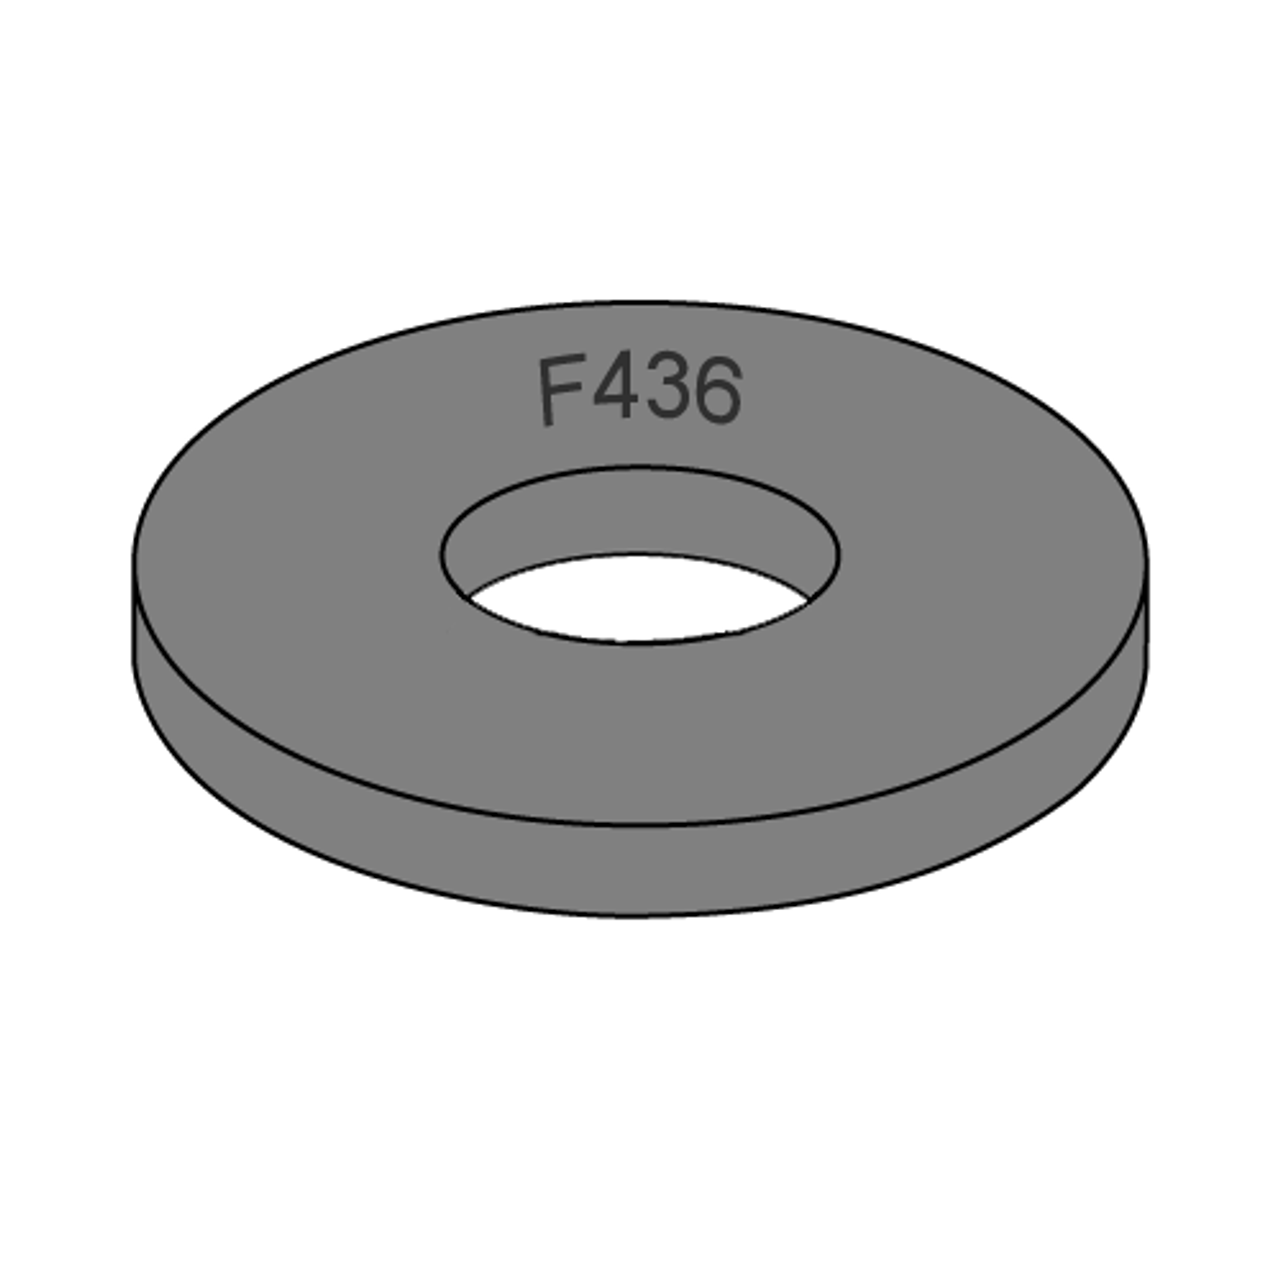 1"x2" Structural Flat Washers 500 Plain 